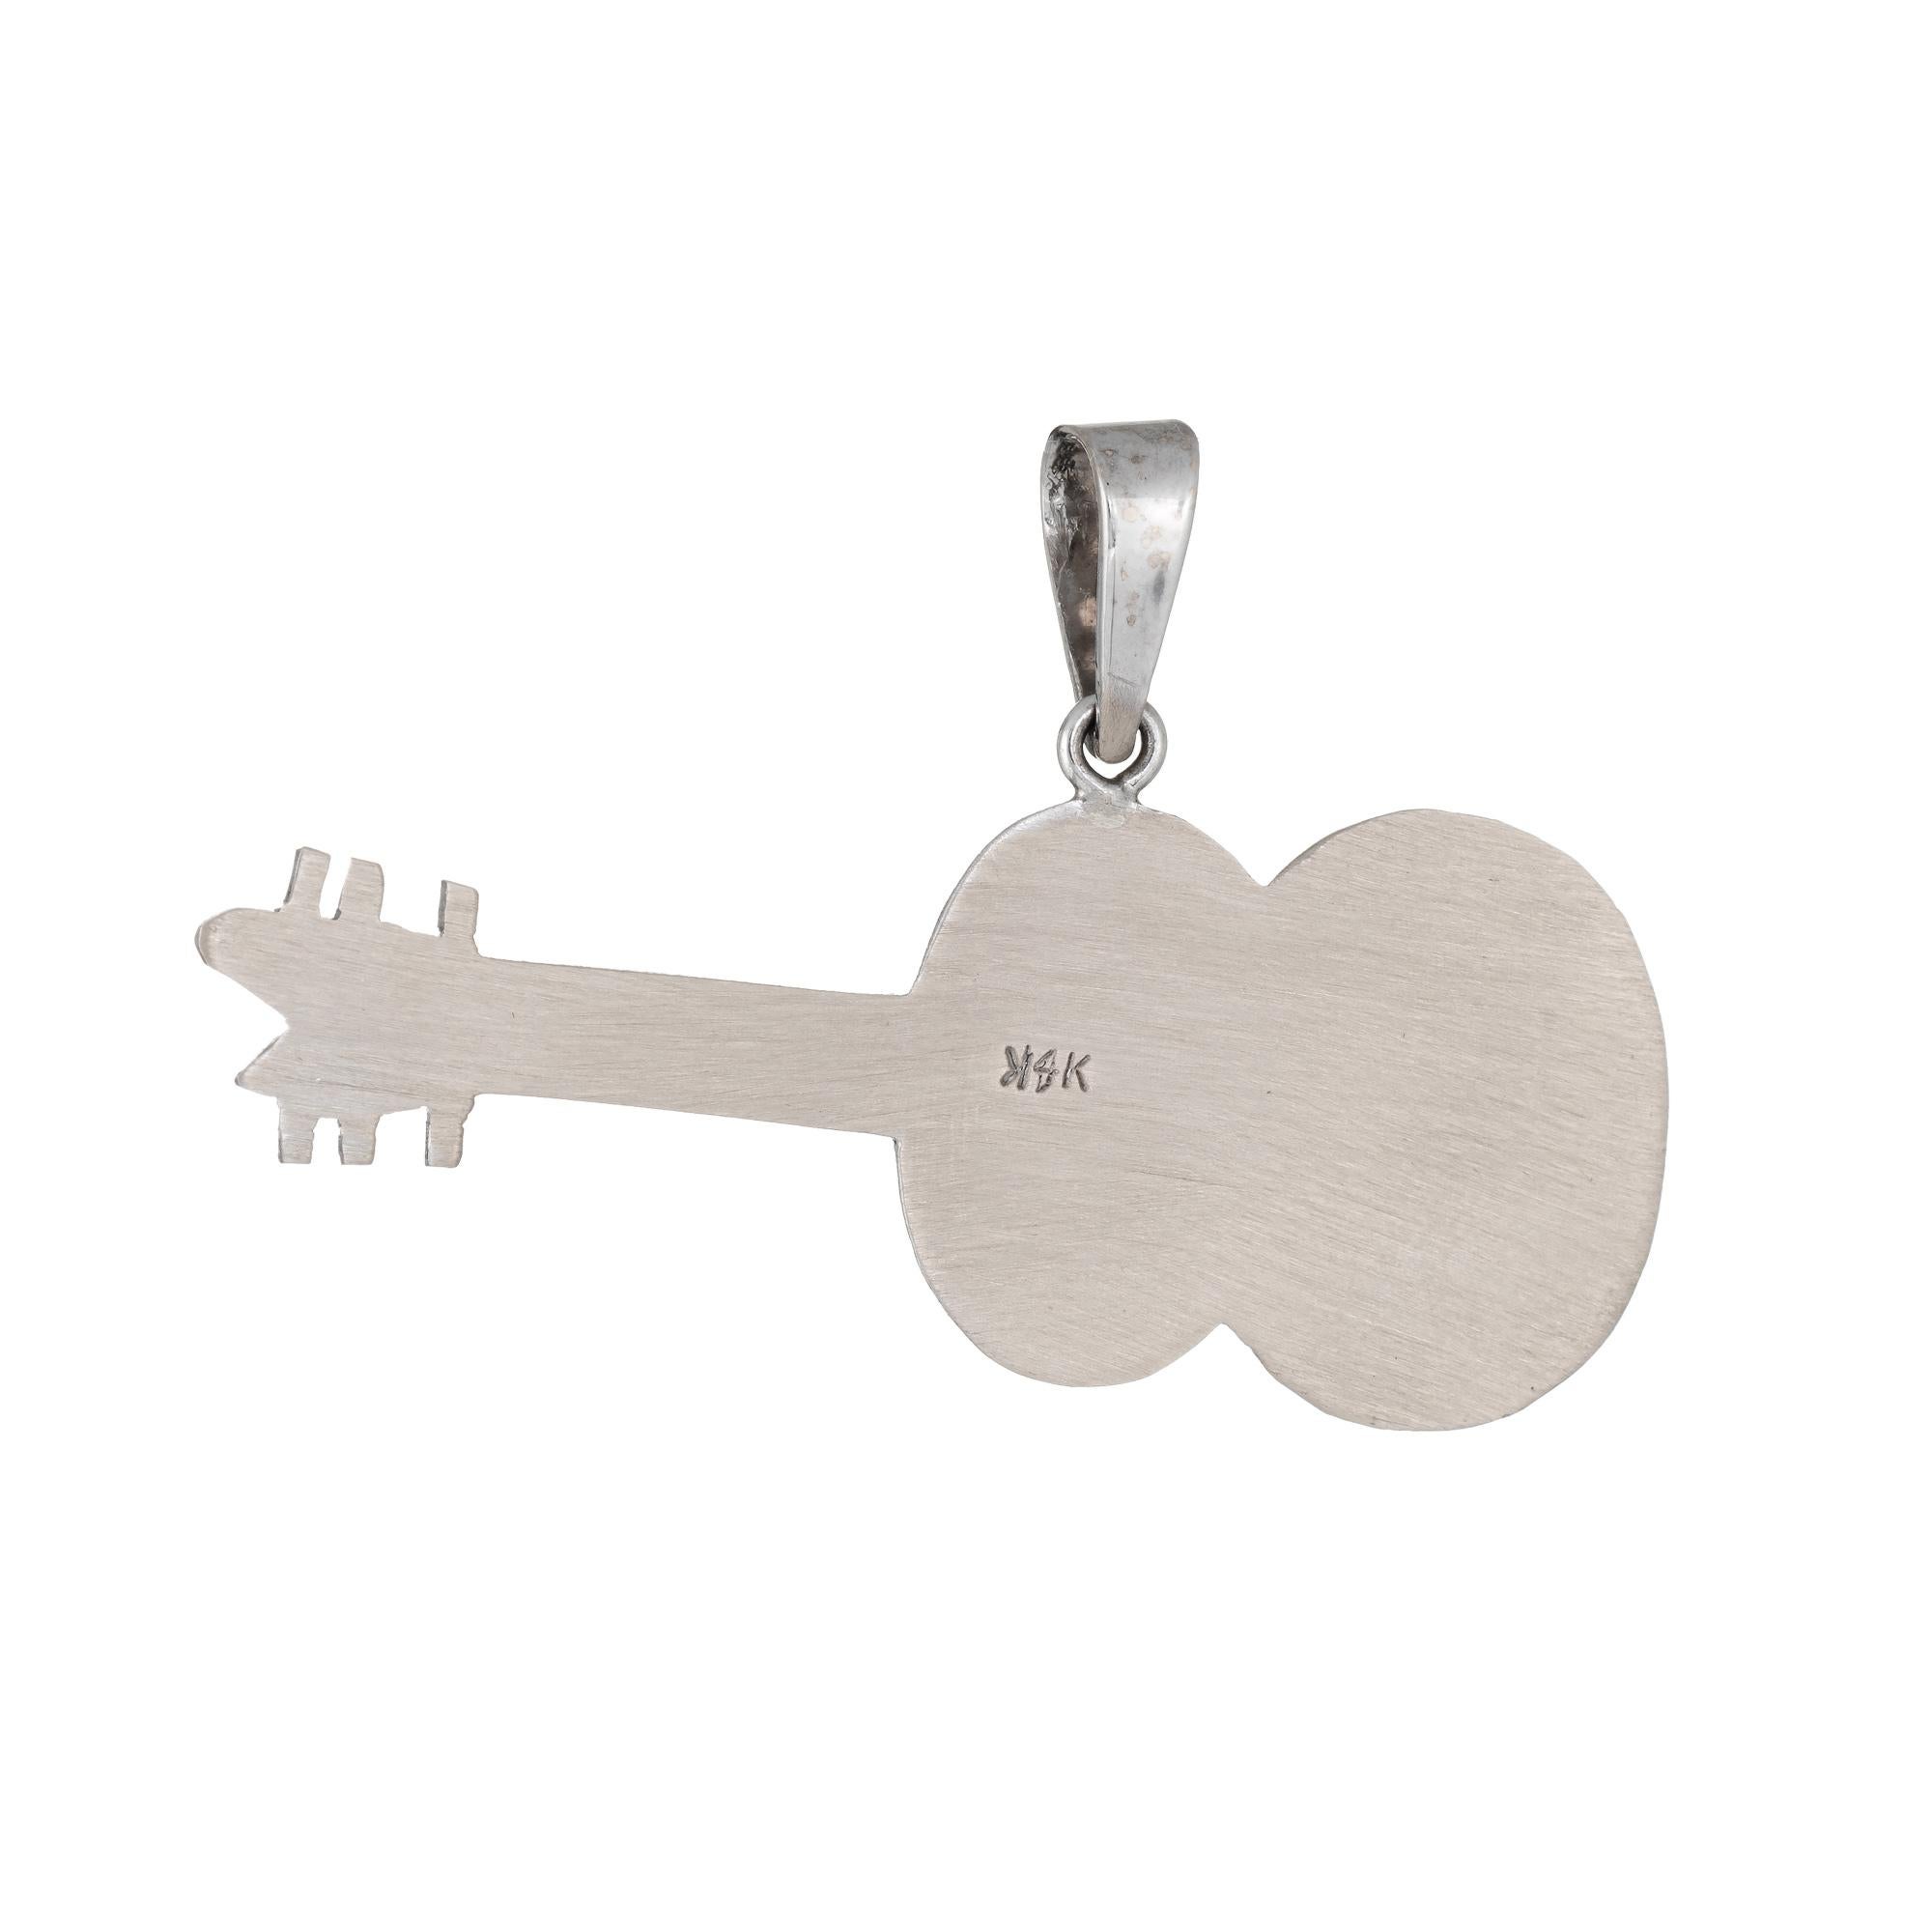 Finely detailed acoustic guitar pendant crafted in 14k white gold.  

The nicely detailed pendant features etched detail that realistically depicts an acoustic guitar.    

The pendant is in excellent original condition and was recently